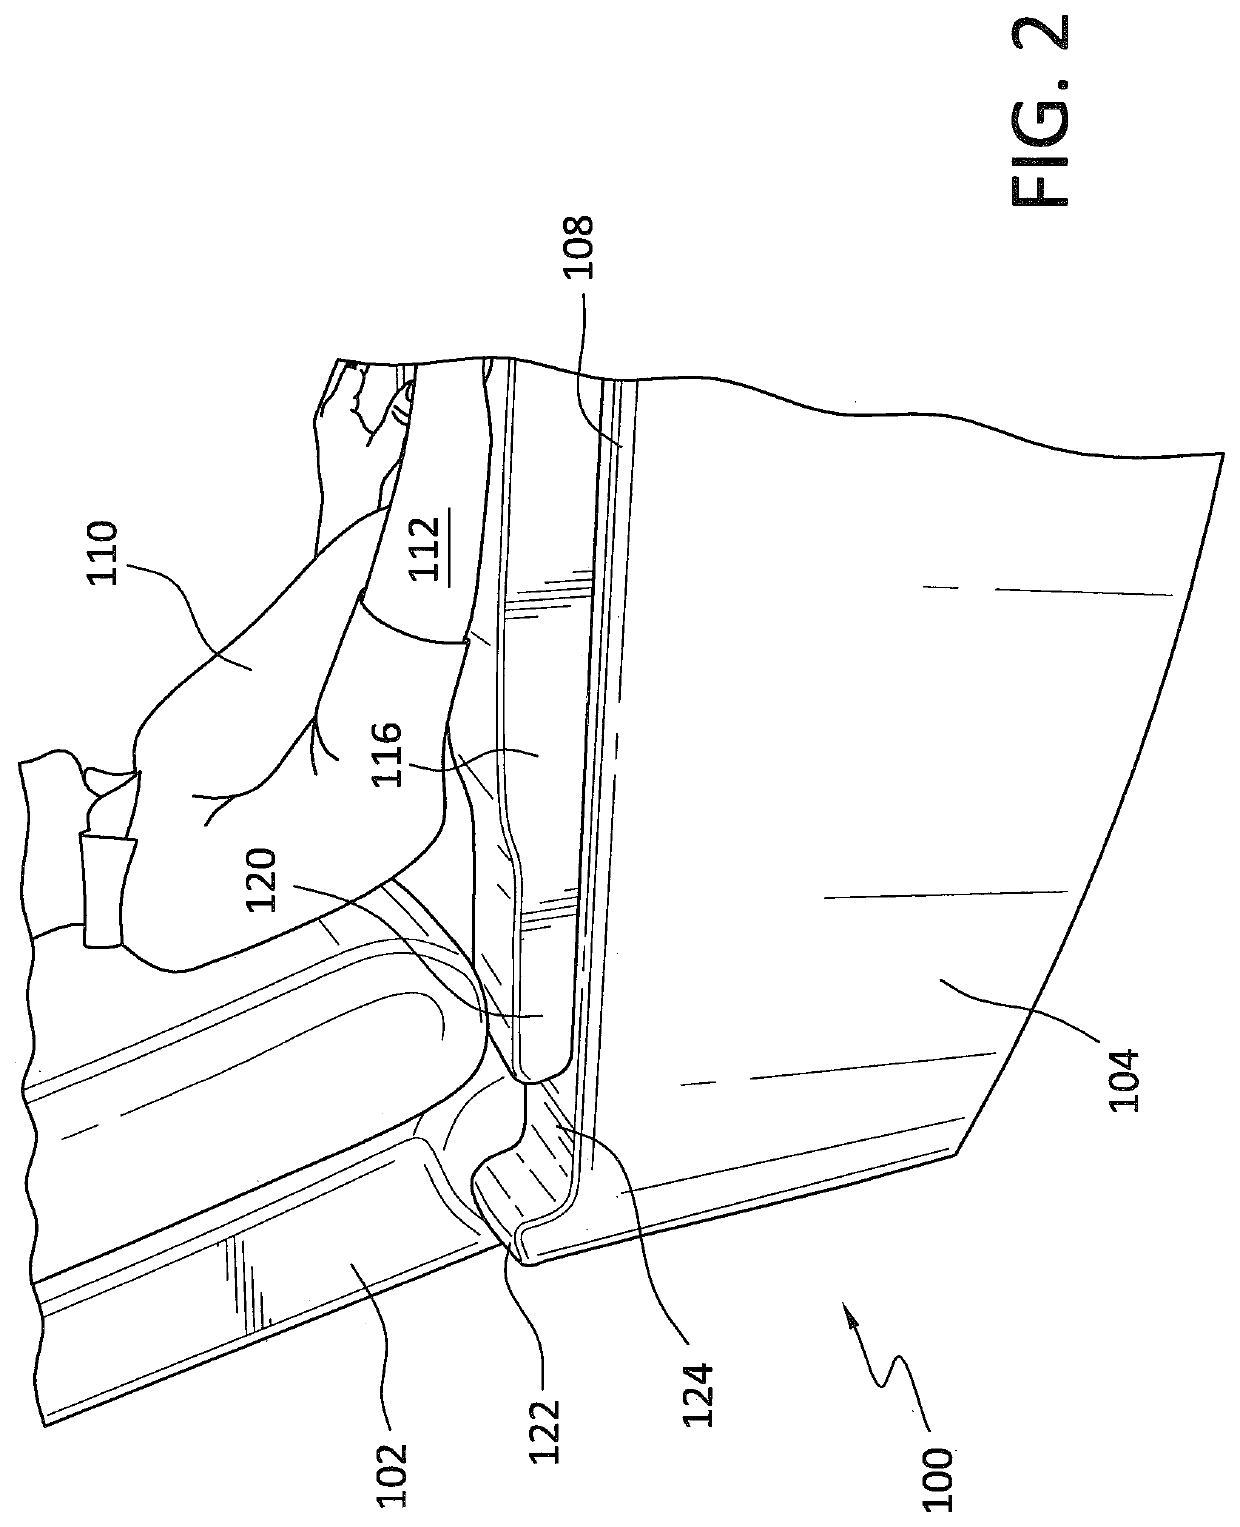 Upper sliding arm portion of a lounger chair, and a motorized mechanism for moving the upper sliding arm portion forwardly so as to cover a storage receptacle defined within a lower fixed arm portion of the chair, and for moving the upper sliding arm portion rearwardly so as to uncover the storage receptacle